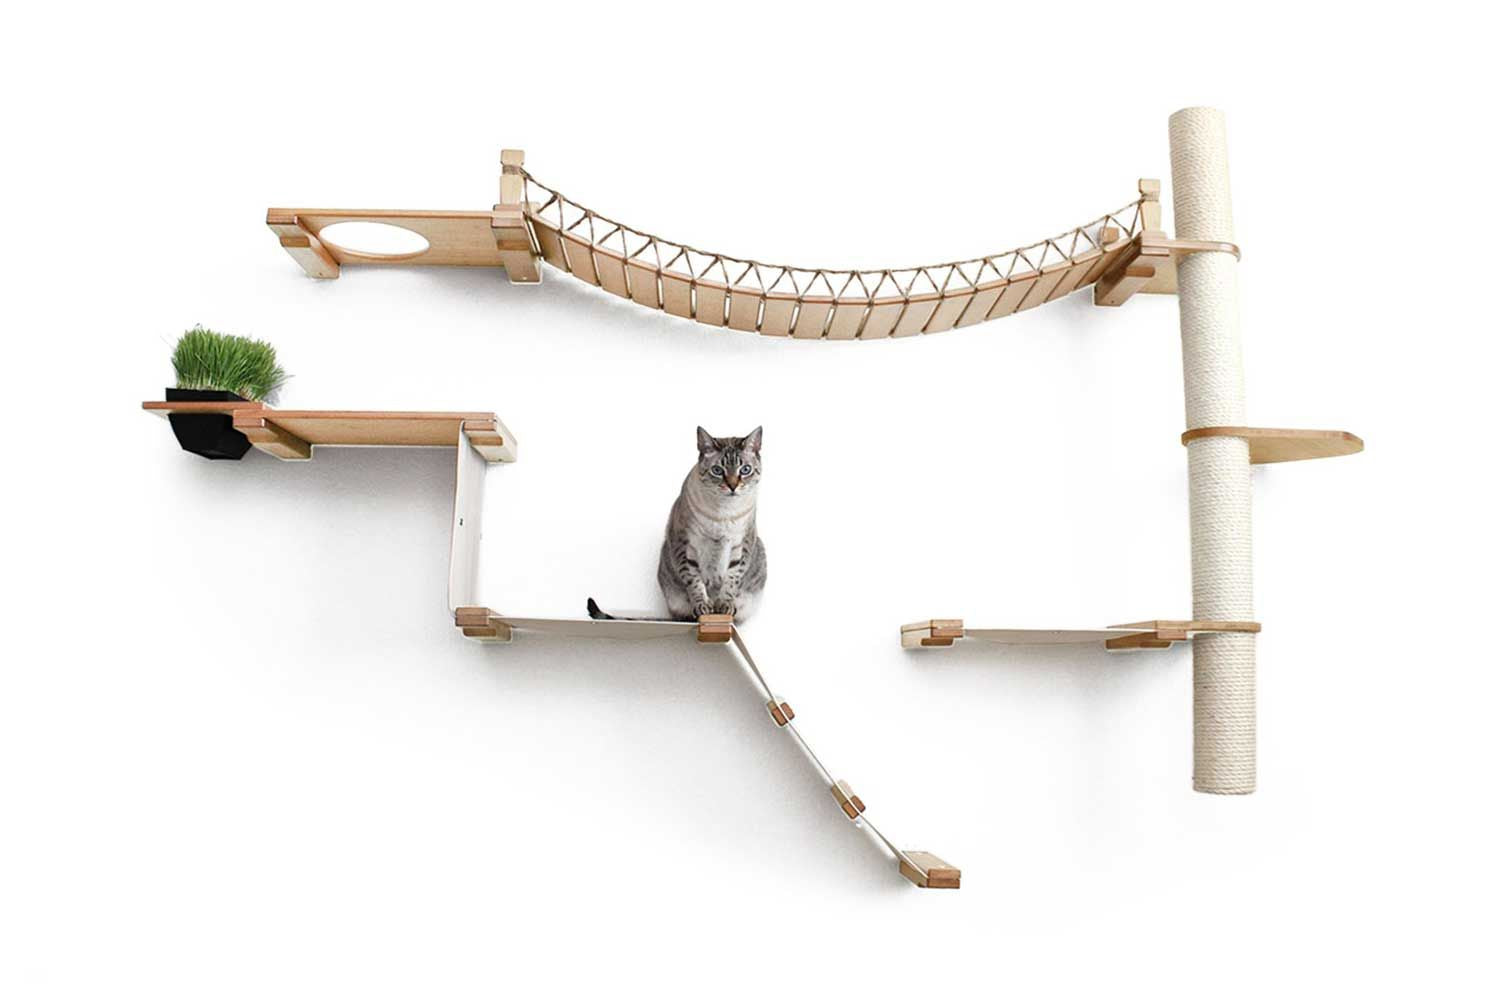 Cat sitting on the Natural Bamboo Expedition Cat Condo with Natural Canvas